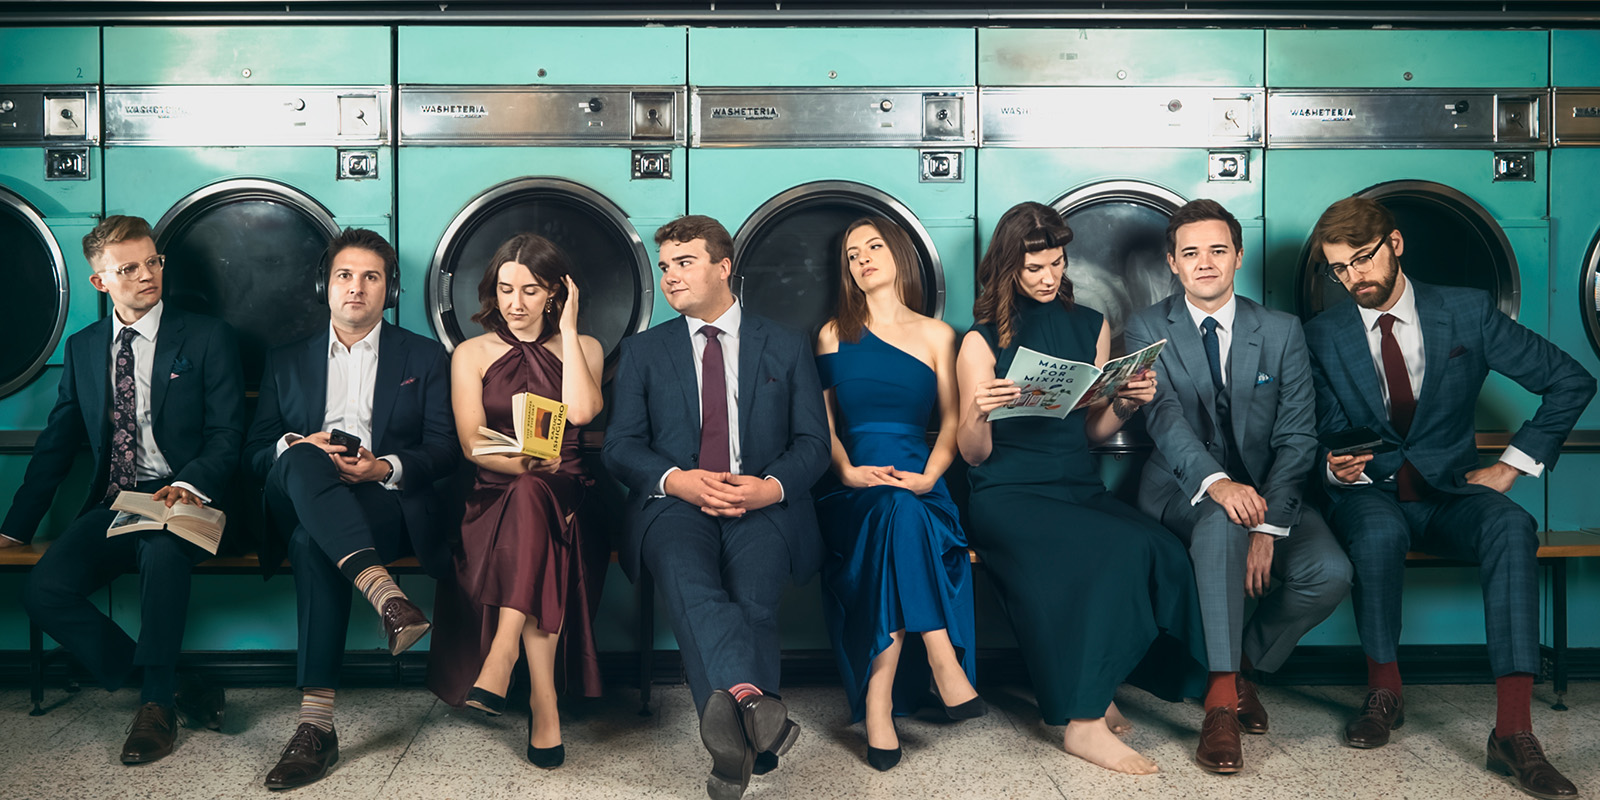 Eight men and women in formal attire sit in a laundromat.